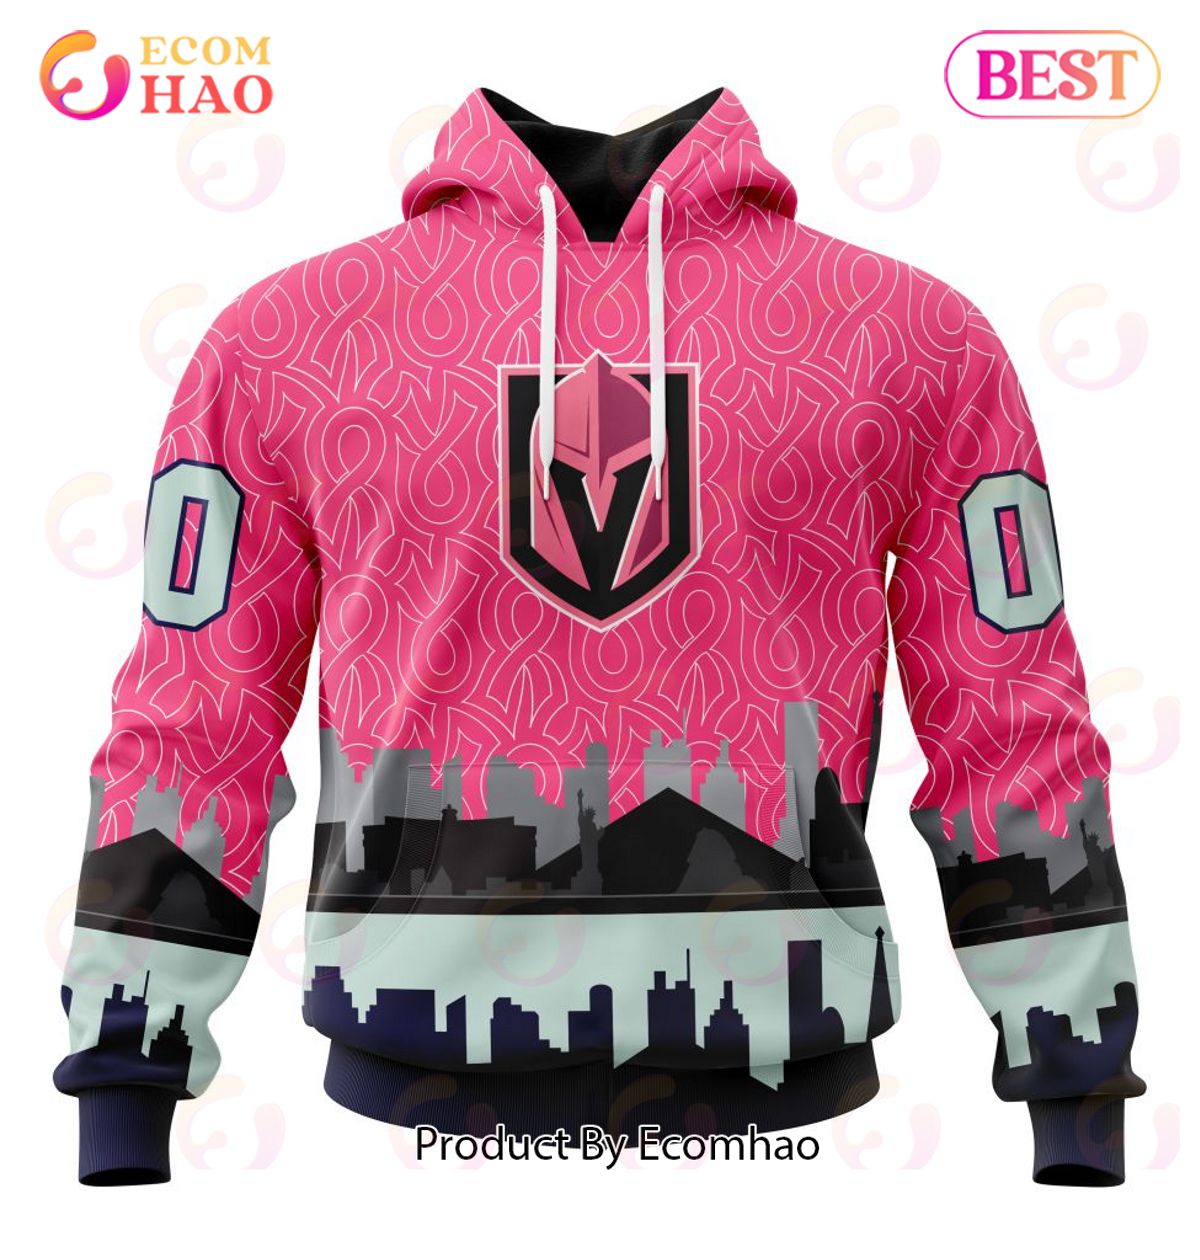 NHL Vegas Golden Knights Specialized Unisex Kits Hockey Fights Against Cancer 3D Hoodie